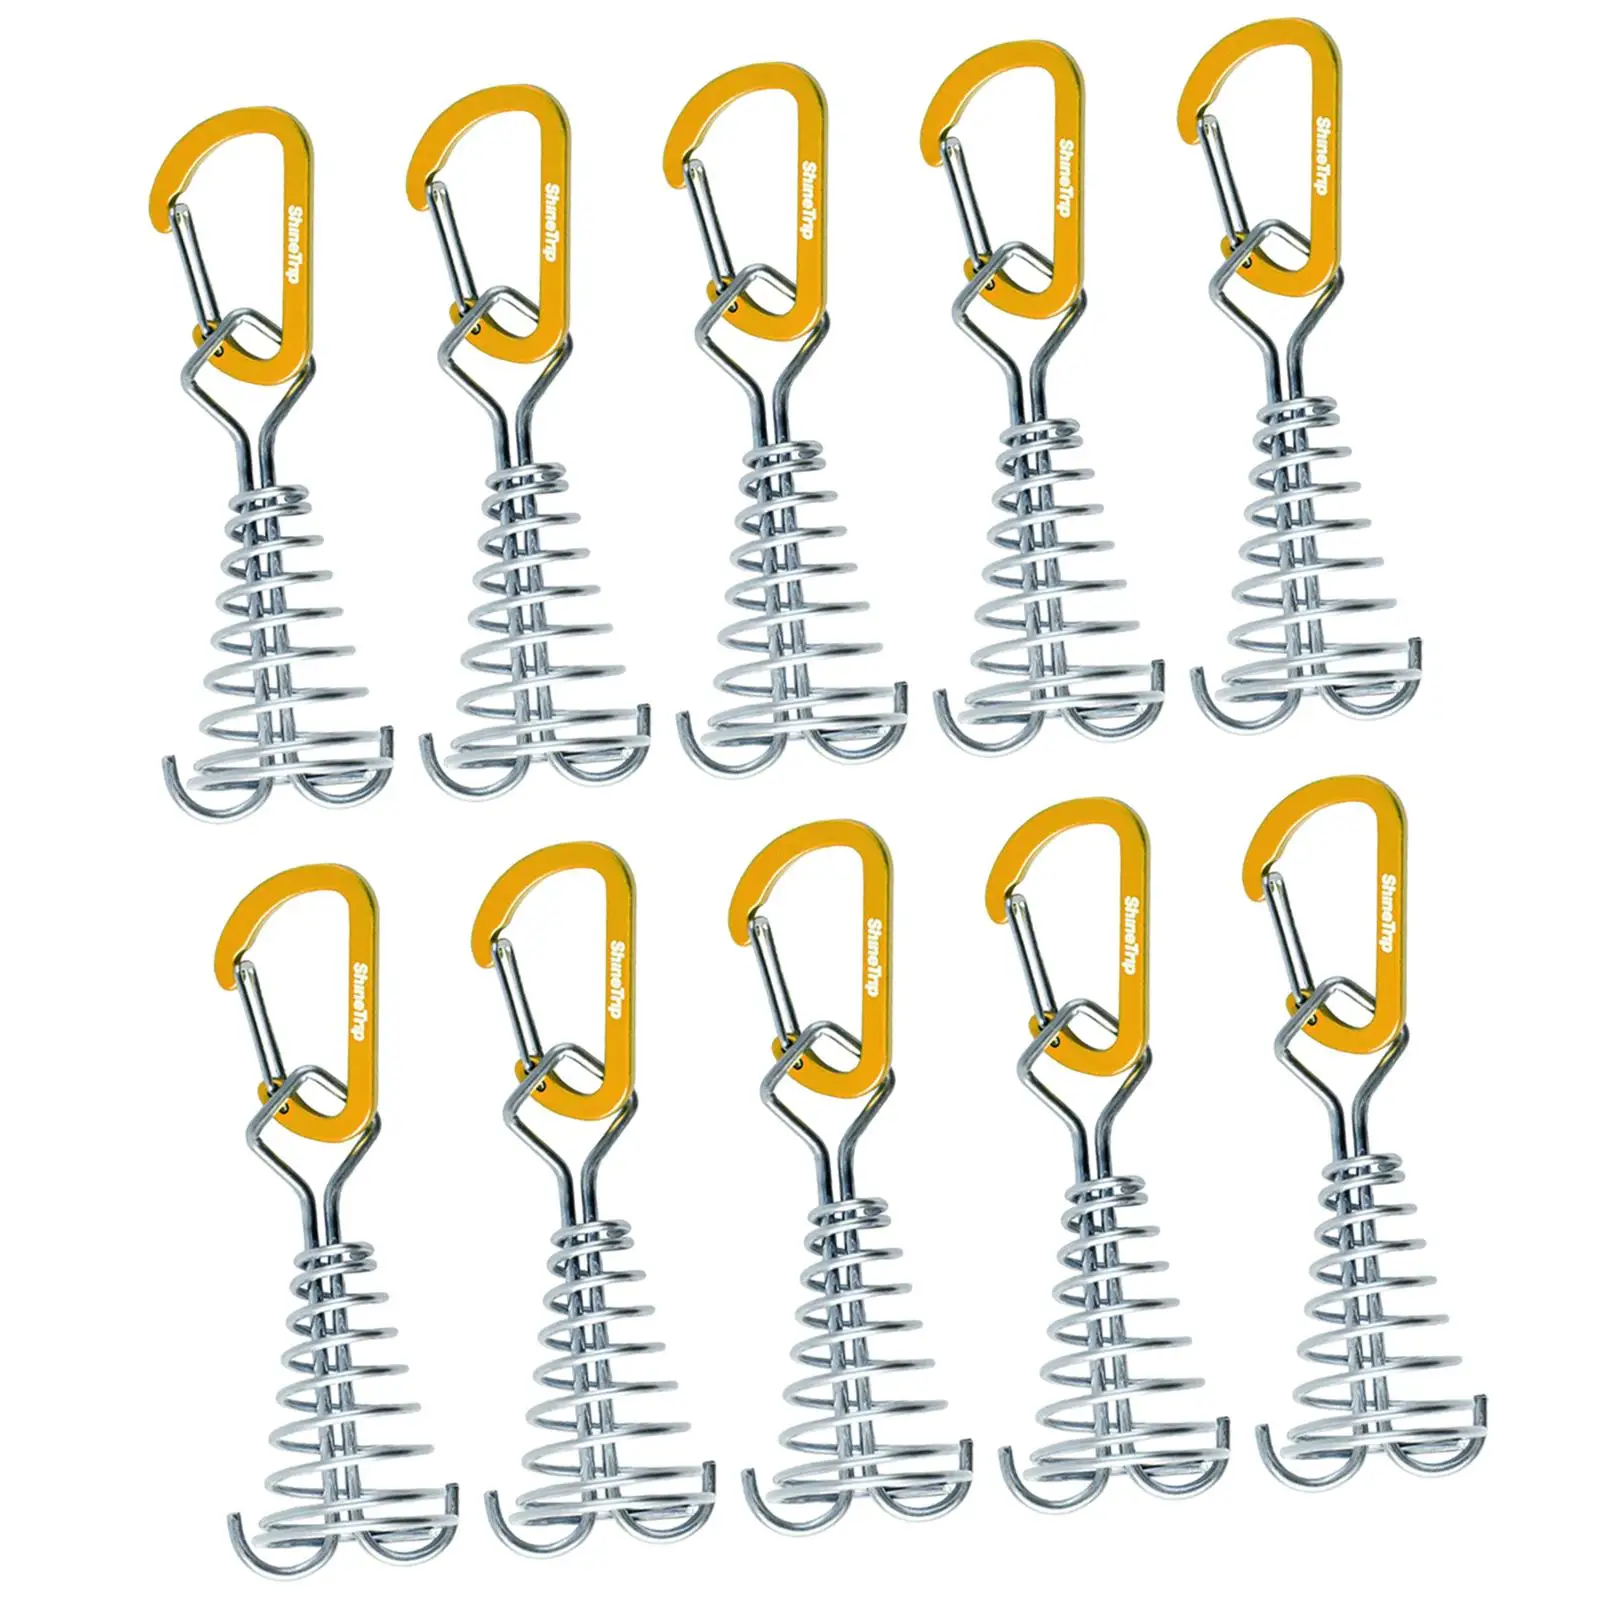 10 Pieces Deck Anchor Pegs with Carabiners Cord Adjuster Tensioner Awning Anchor, Deck Tie Down Tent Stakes for Wood Platform